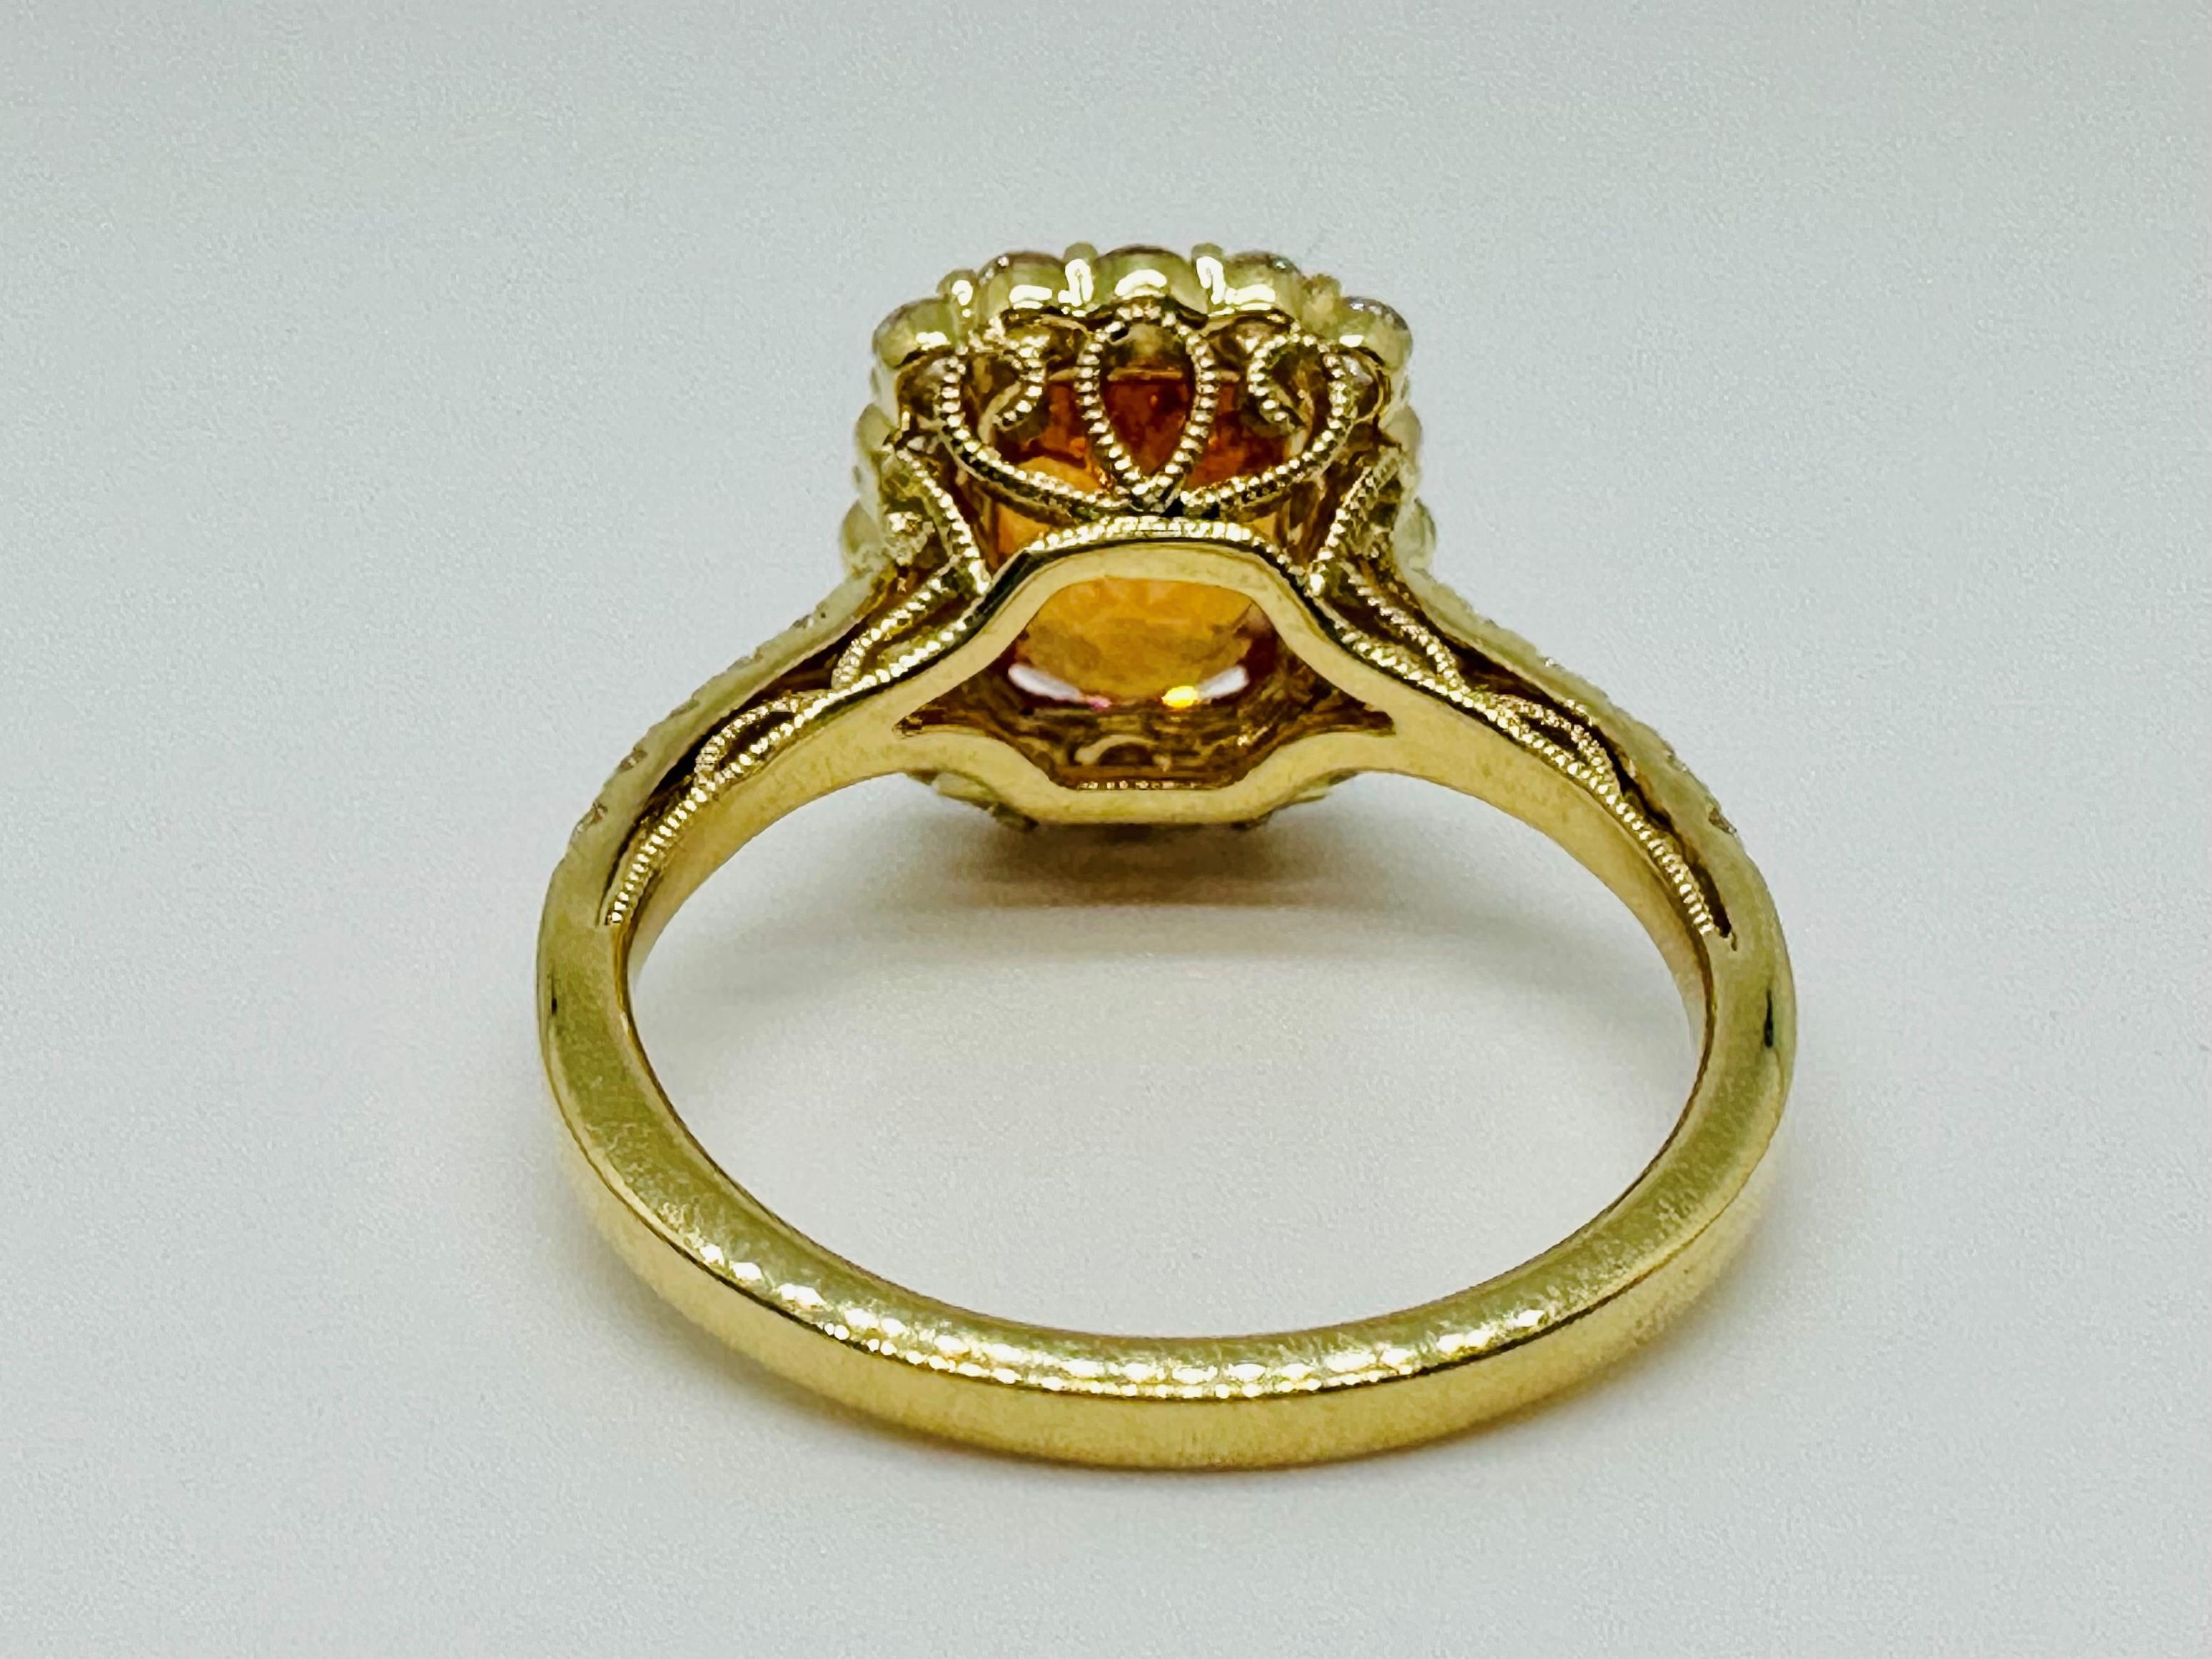 Contemporary 18K Yellow Gold 3.21 Carat Spessartite & Diamond Cocktail Ring For Sale